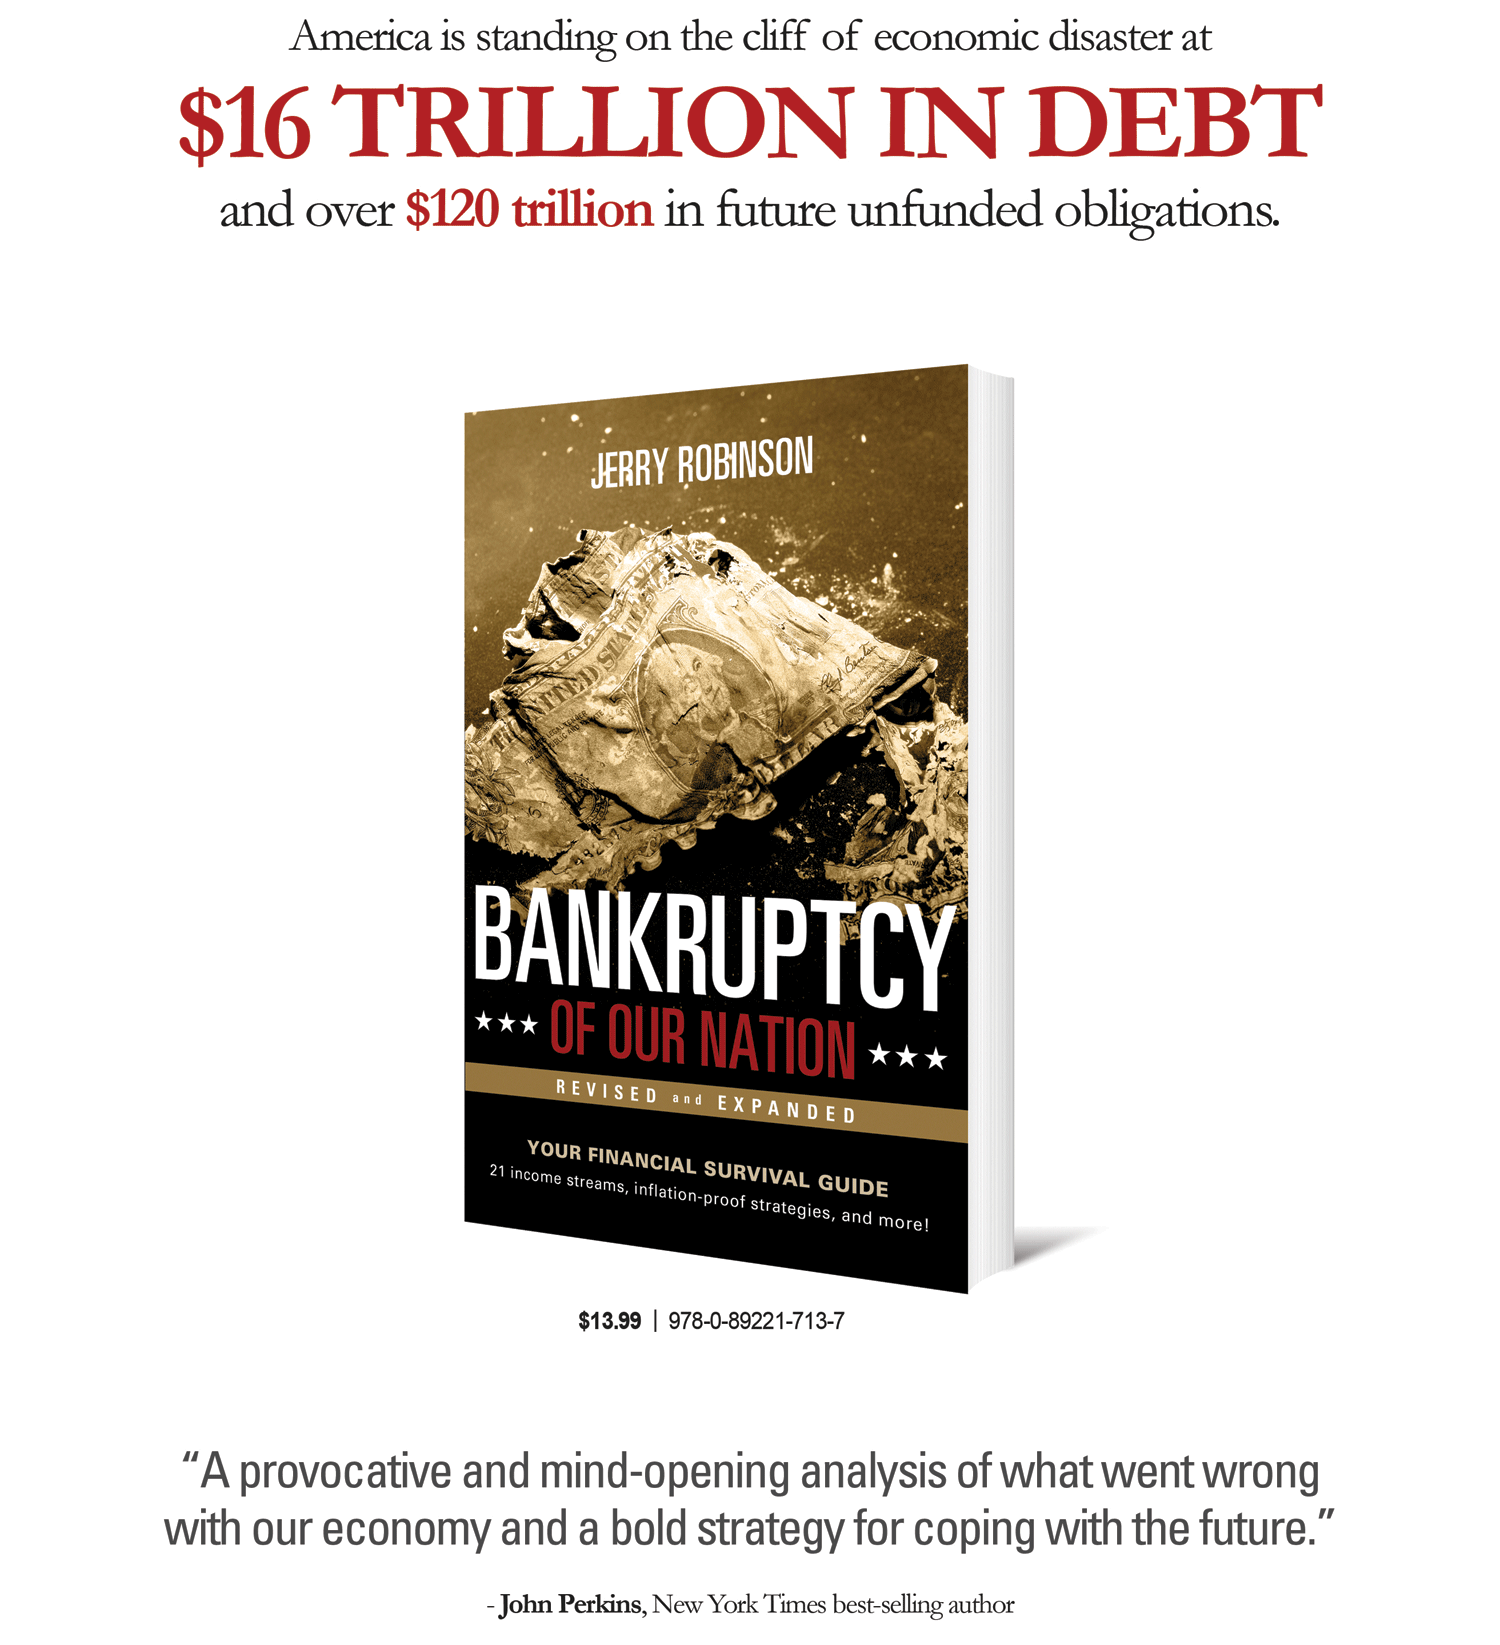 What the Experts Are Saying About Bankruptcy of our Nation